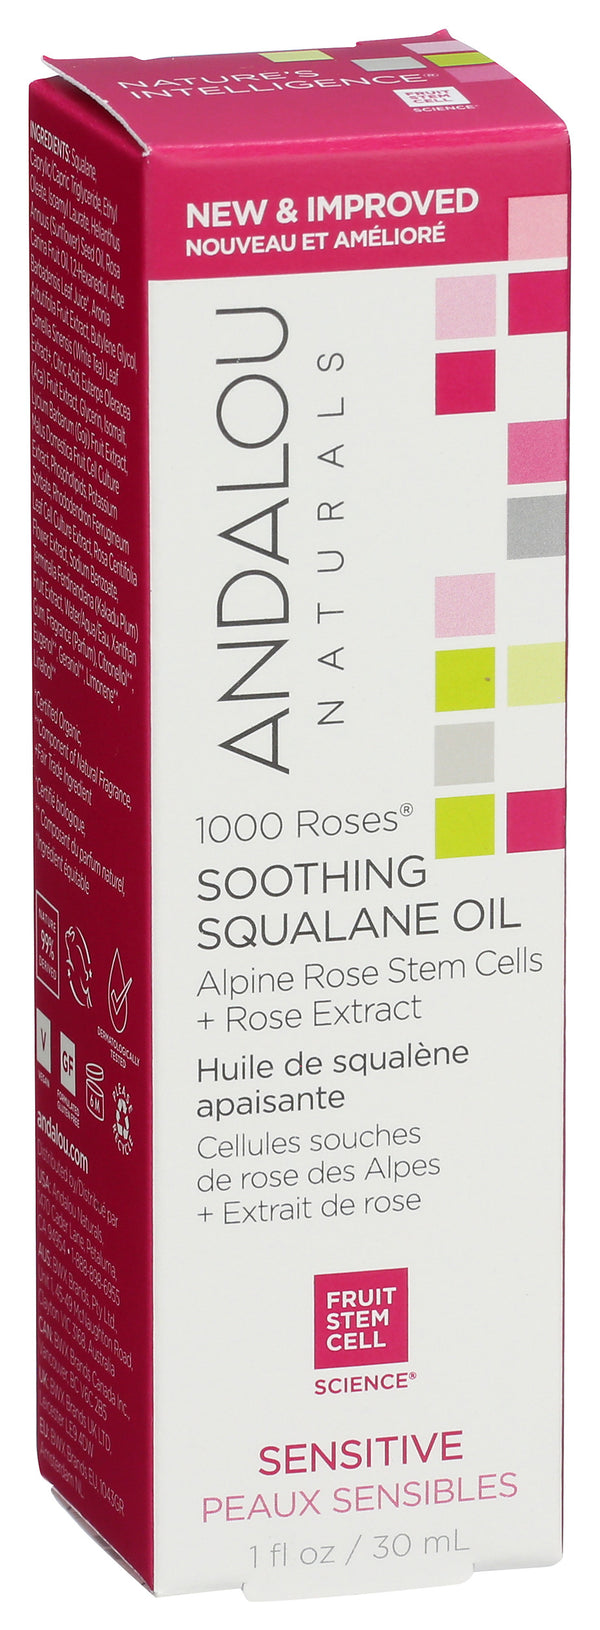 1000 Roses Soothing Squalane Oil, 1 floz